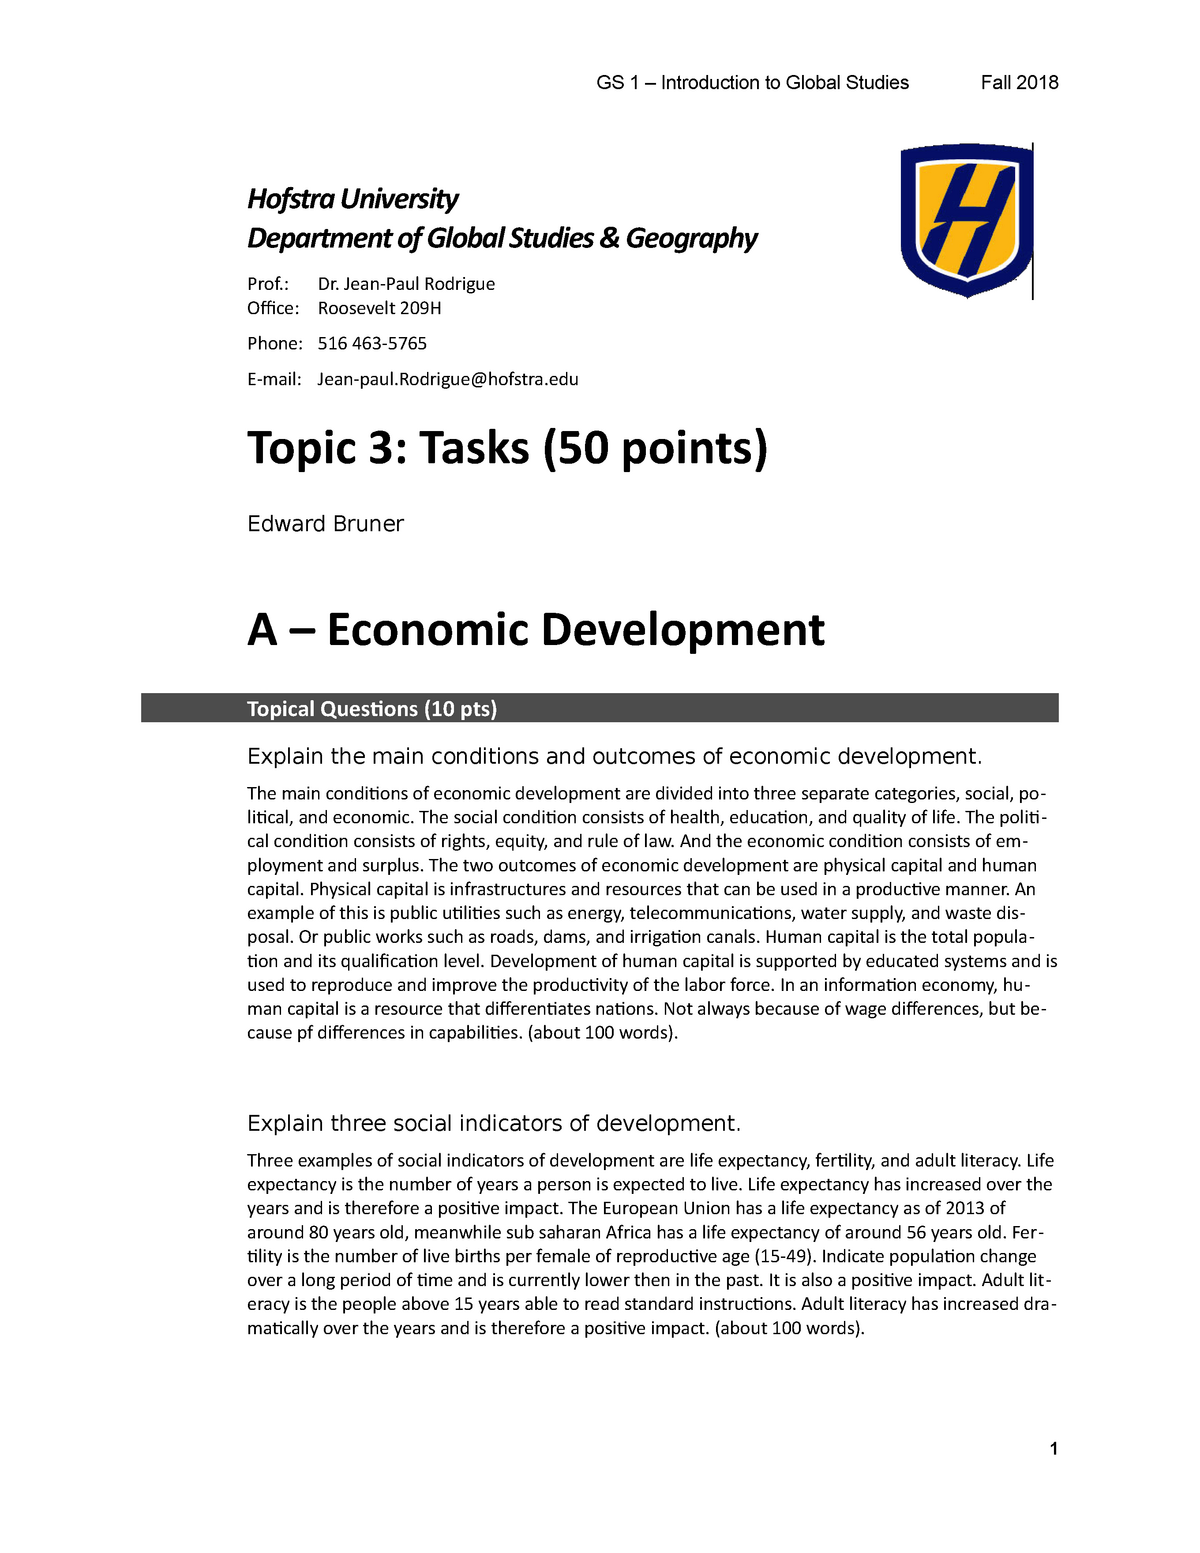 GS 1 Topic 3 Tasks word - Grade: B+ - GS 1 – Introduction to Global gs 9 step 1 pay